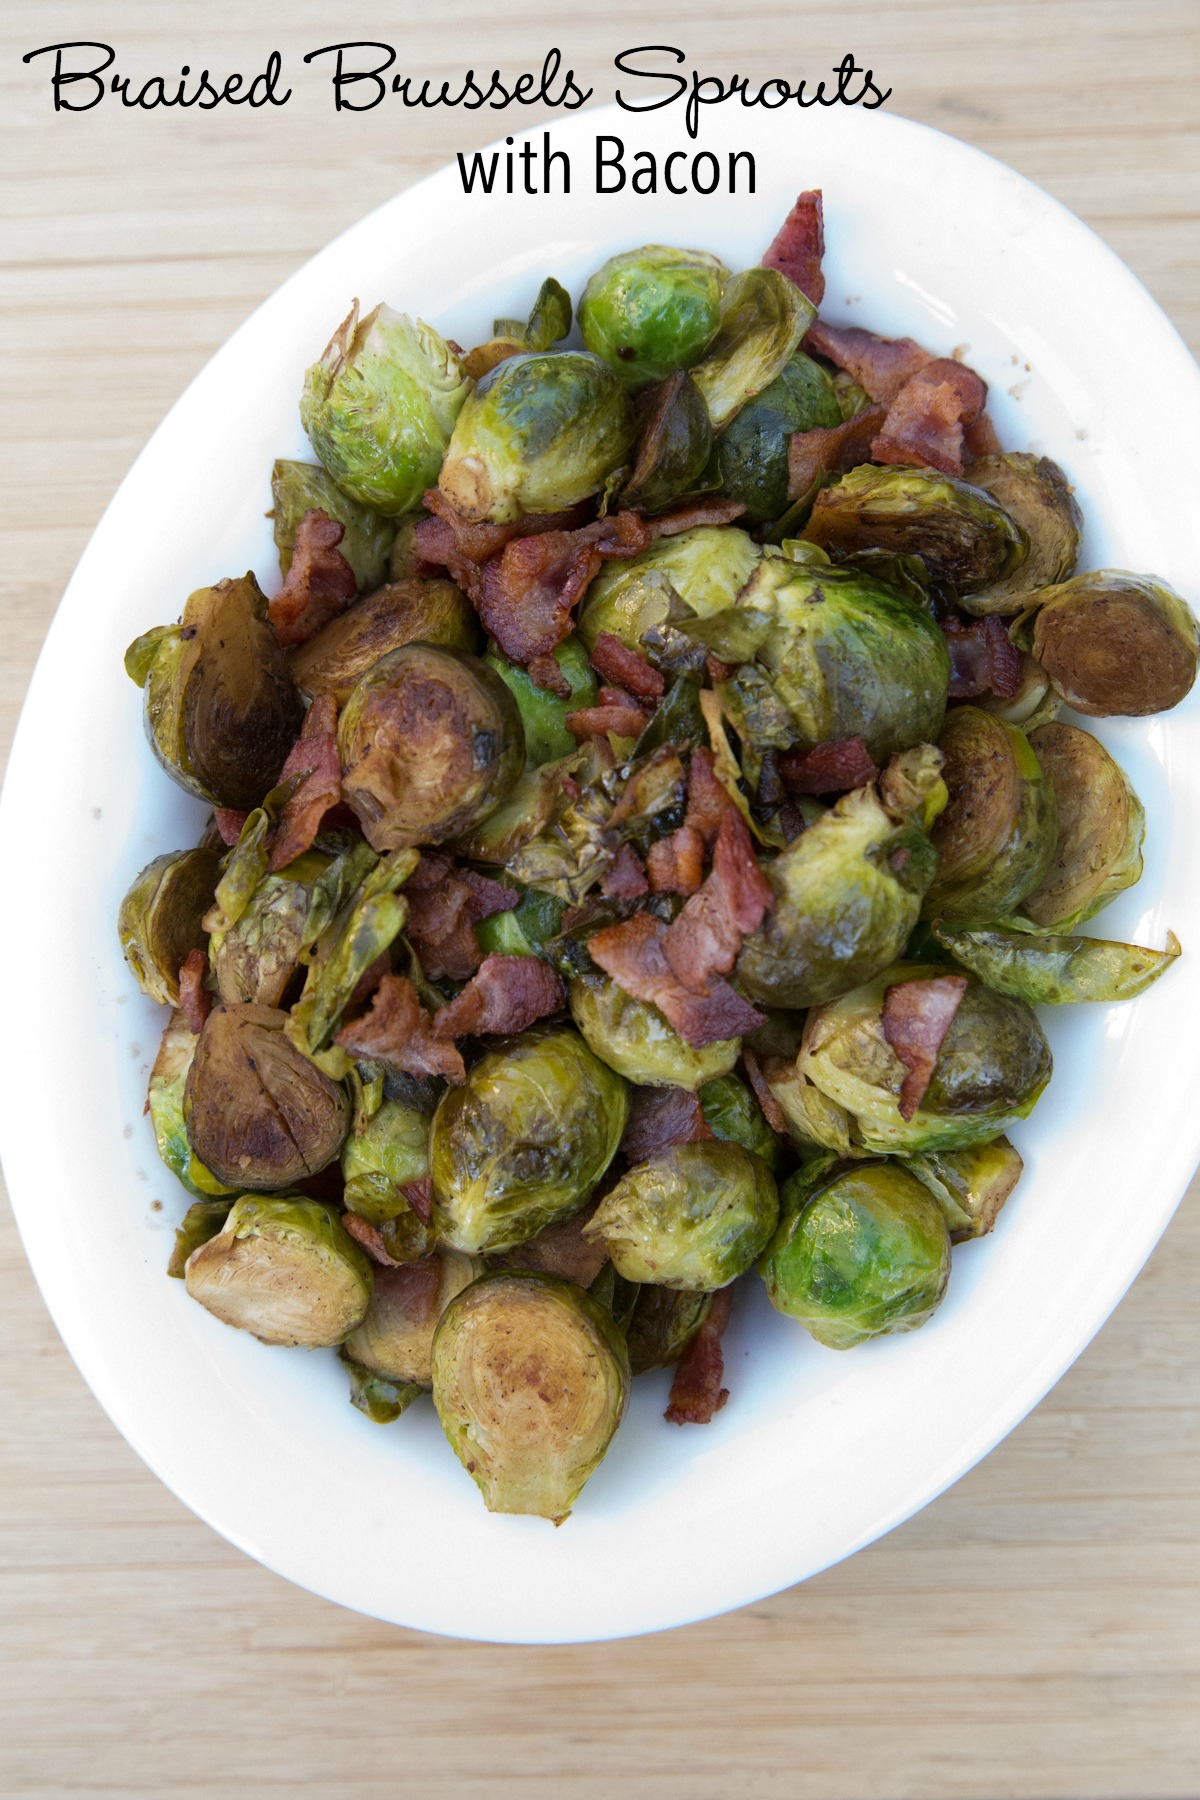 braised-brussels-sprouts-with-bacon-on-5dollardinners-com